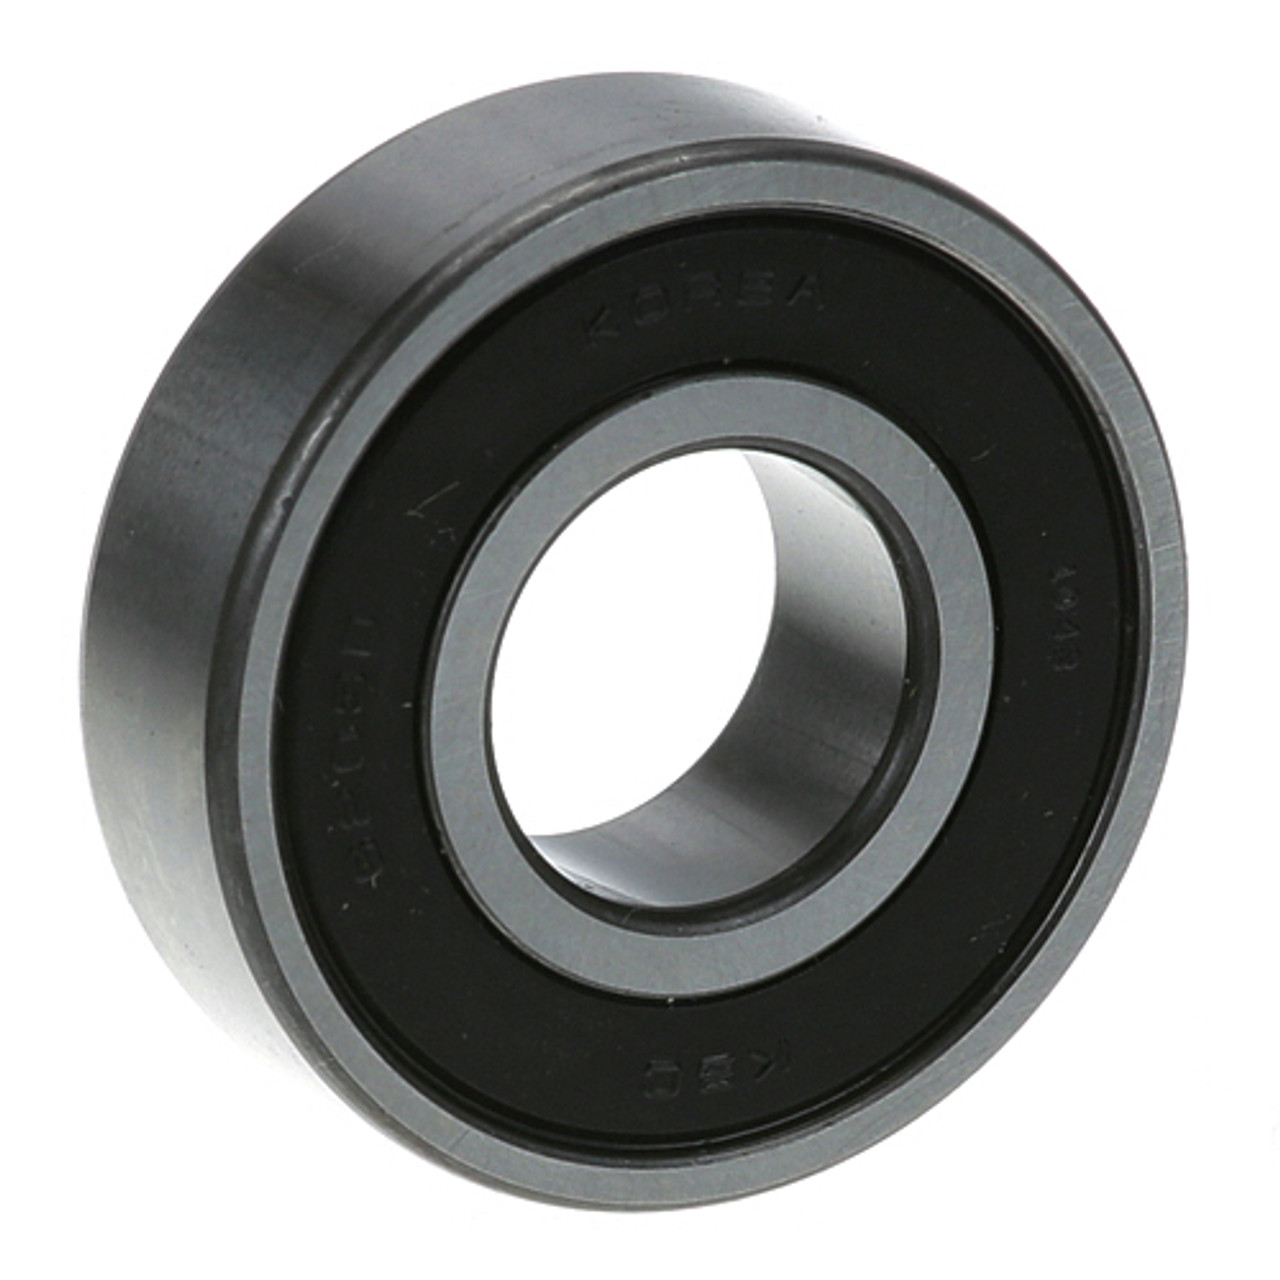 Bearing - Replacement Part For Hobart 00-BB-20-18